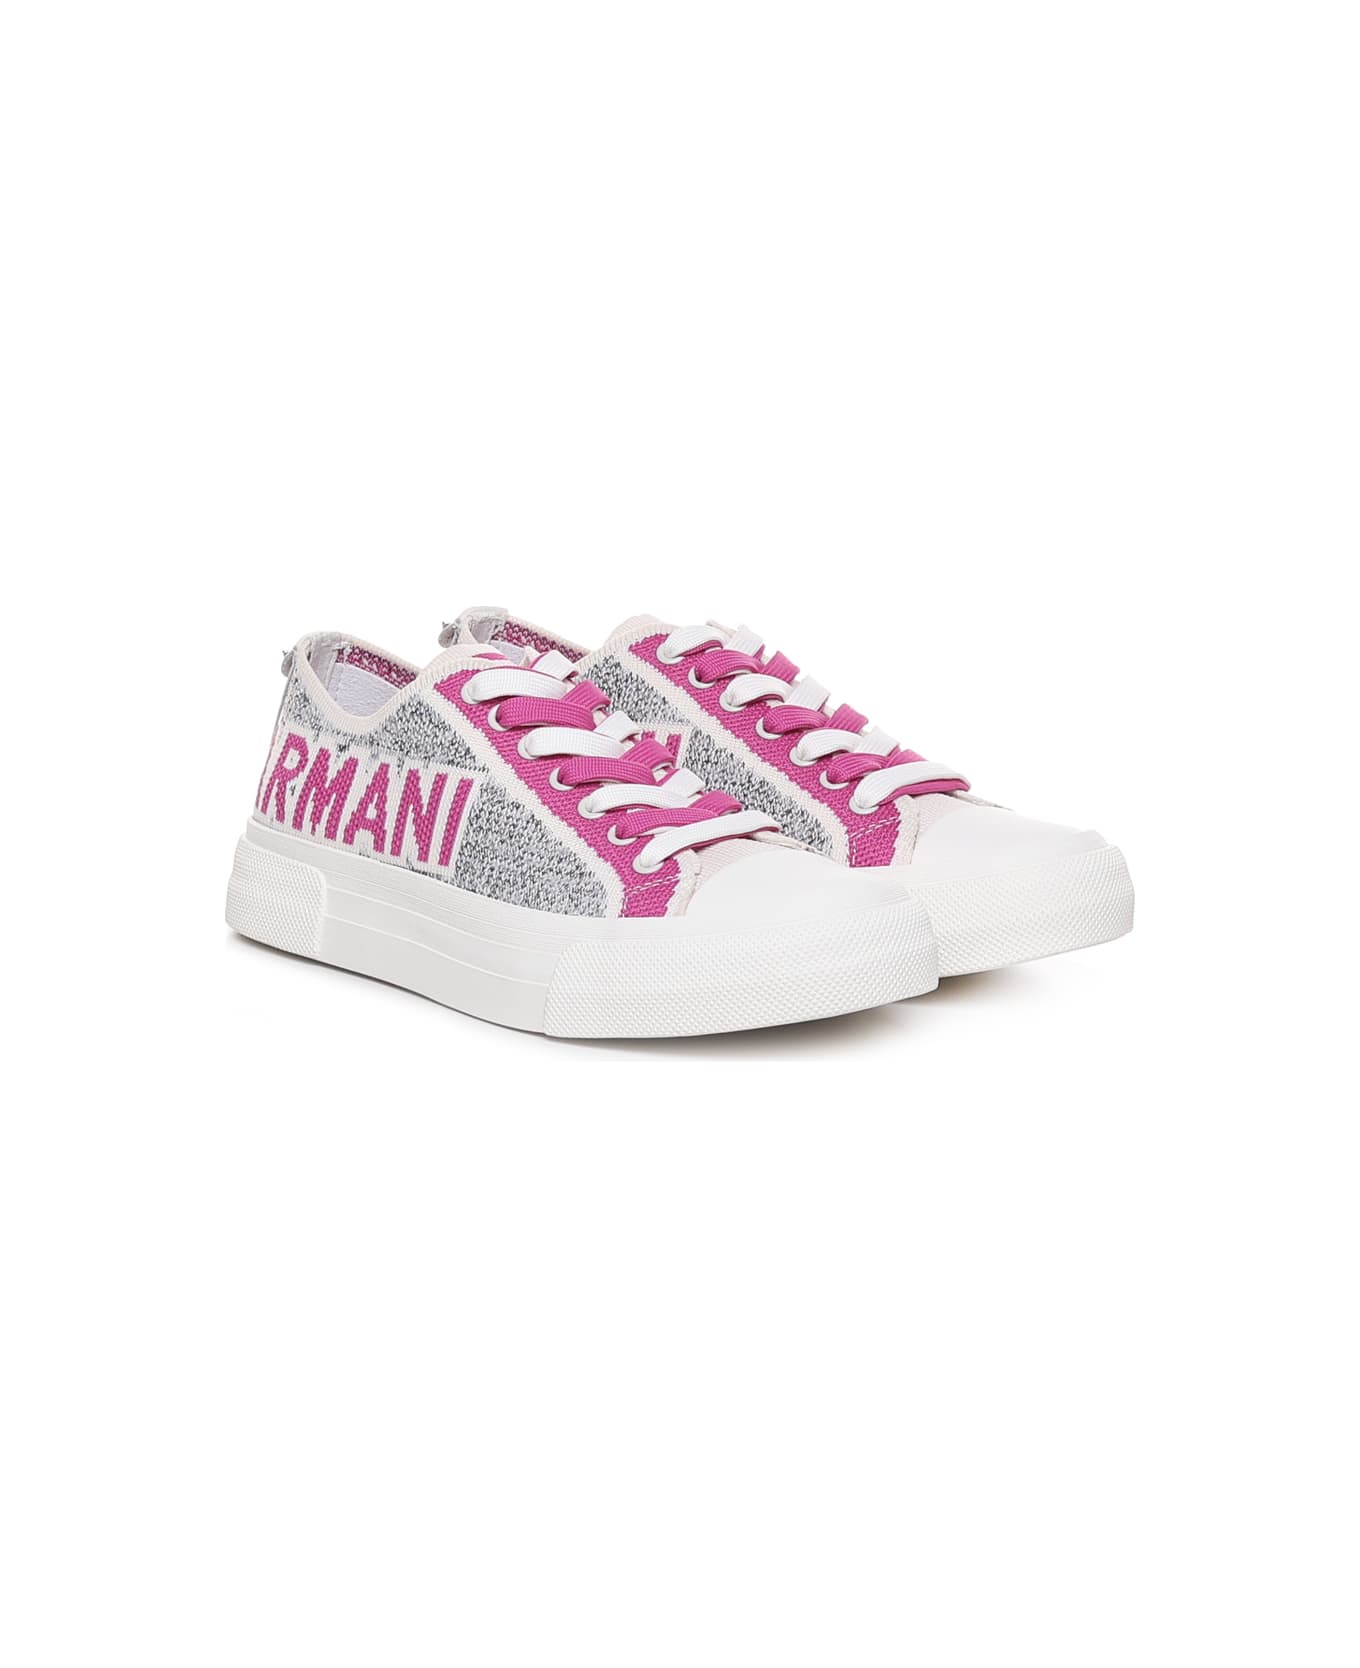 Emporio Armani Sneakers With Print - Off white+pink